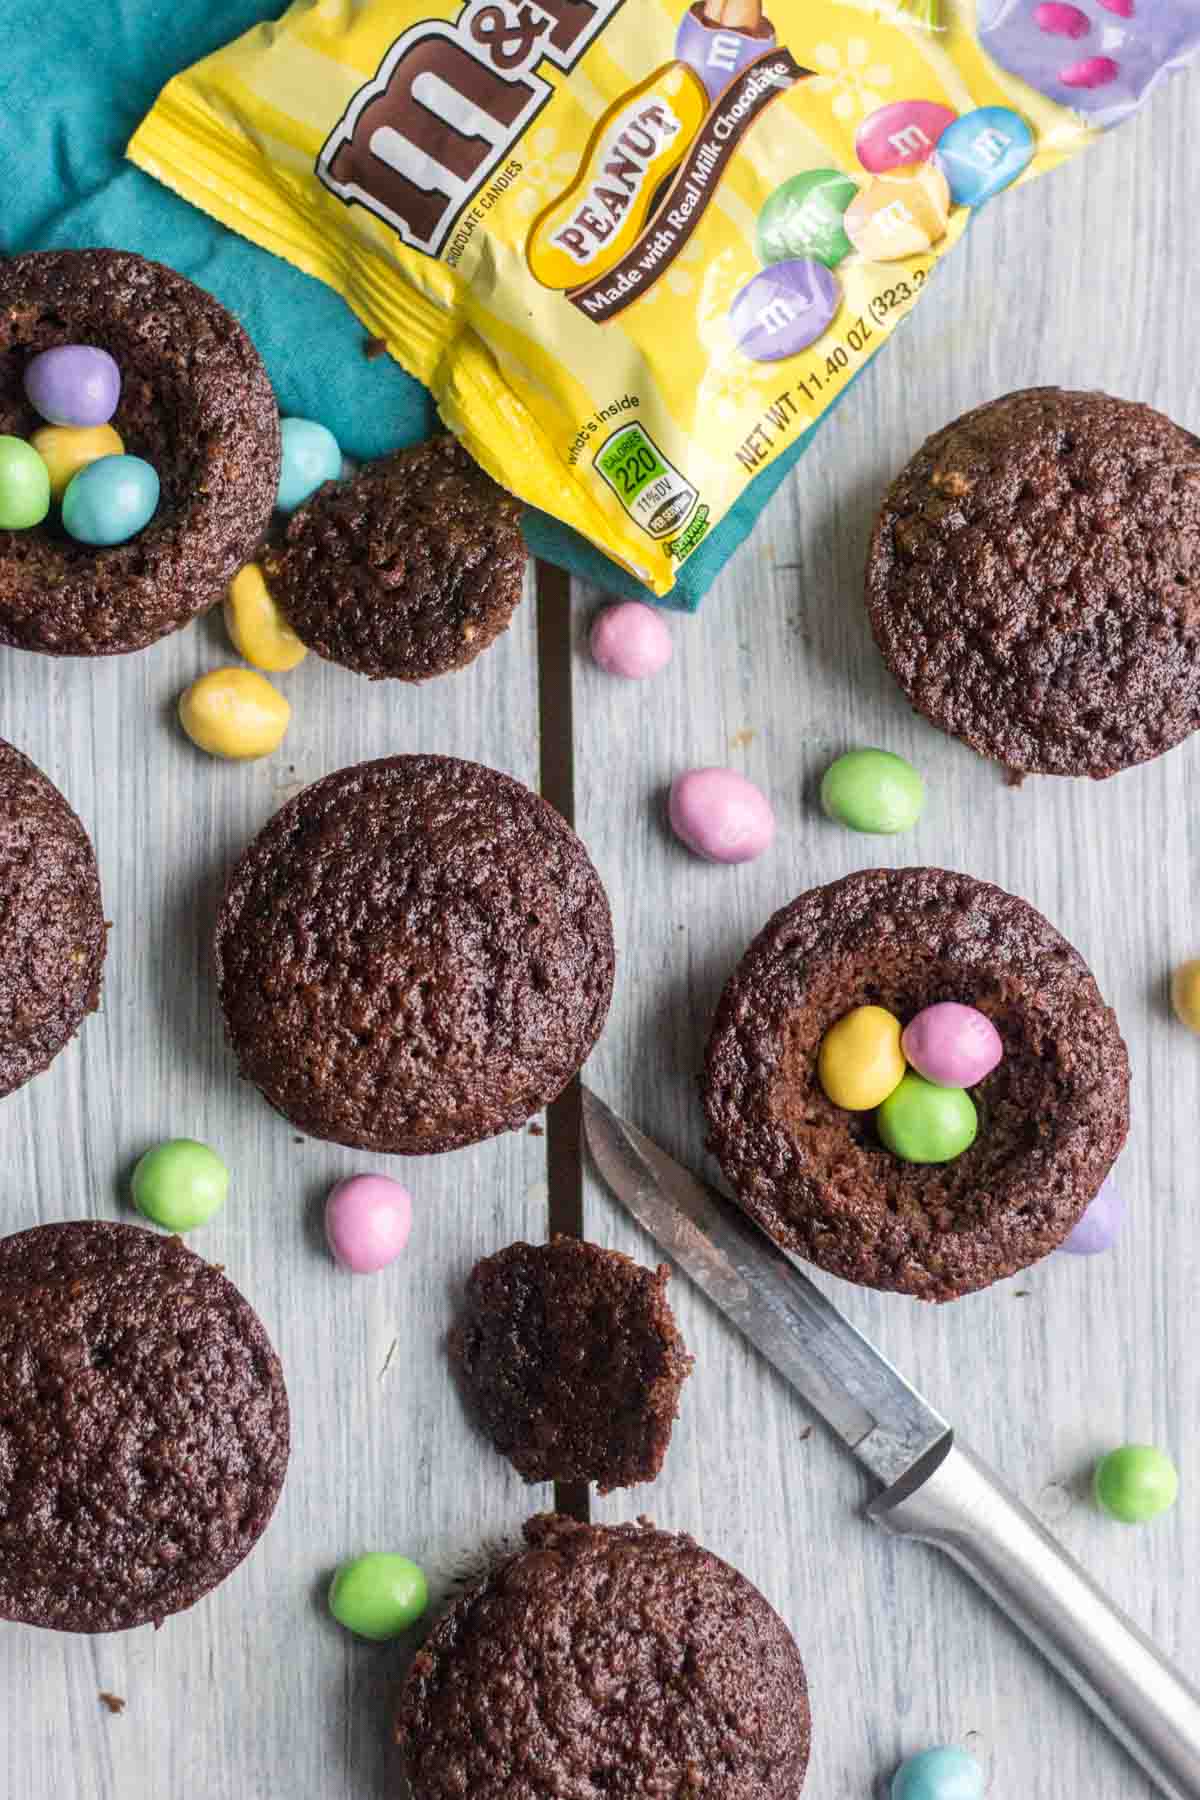 Light and fluffy chocolate cupcakes are topped with a sweet and creamy peanut butter frosting. Plus, there's a fun Easter surprise on the inside! These Chocolate Peanut Butter Piñata Cupcakes will surprise and delight all of your friends and family.